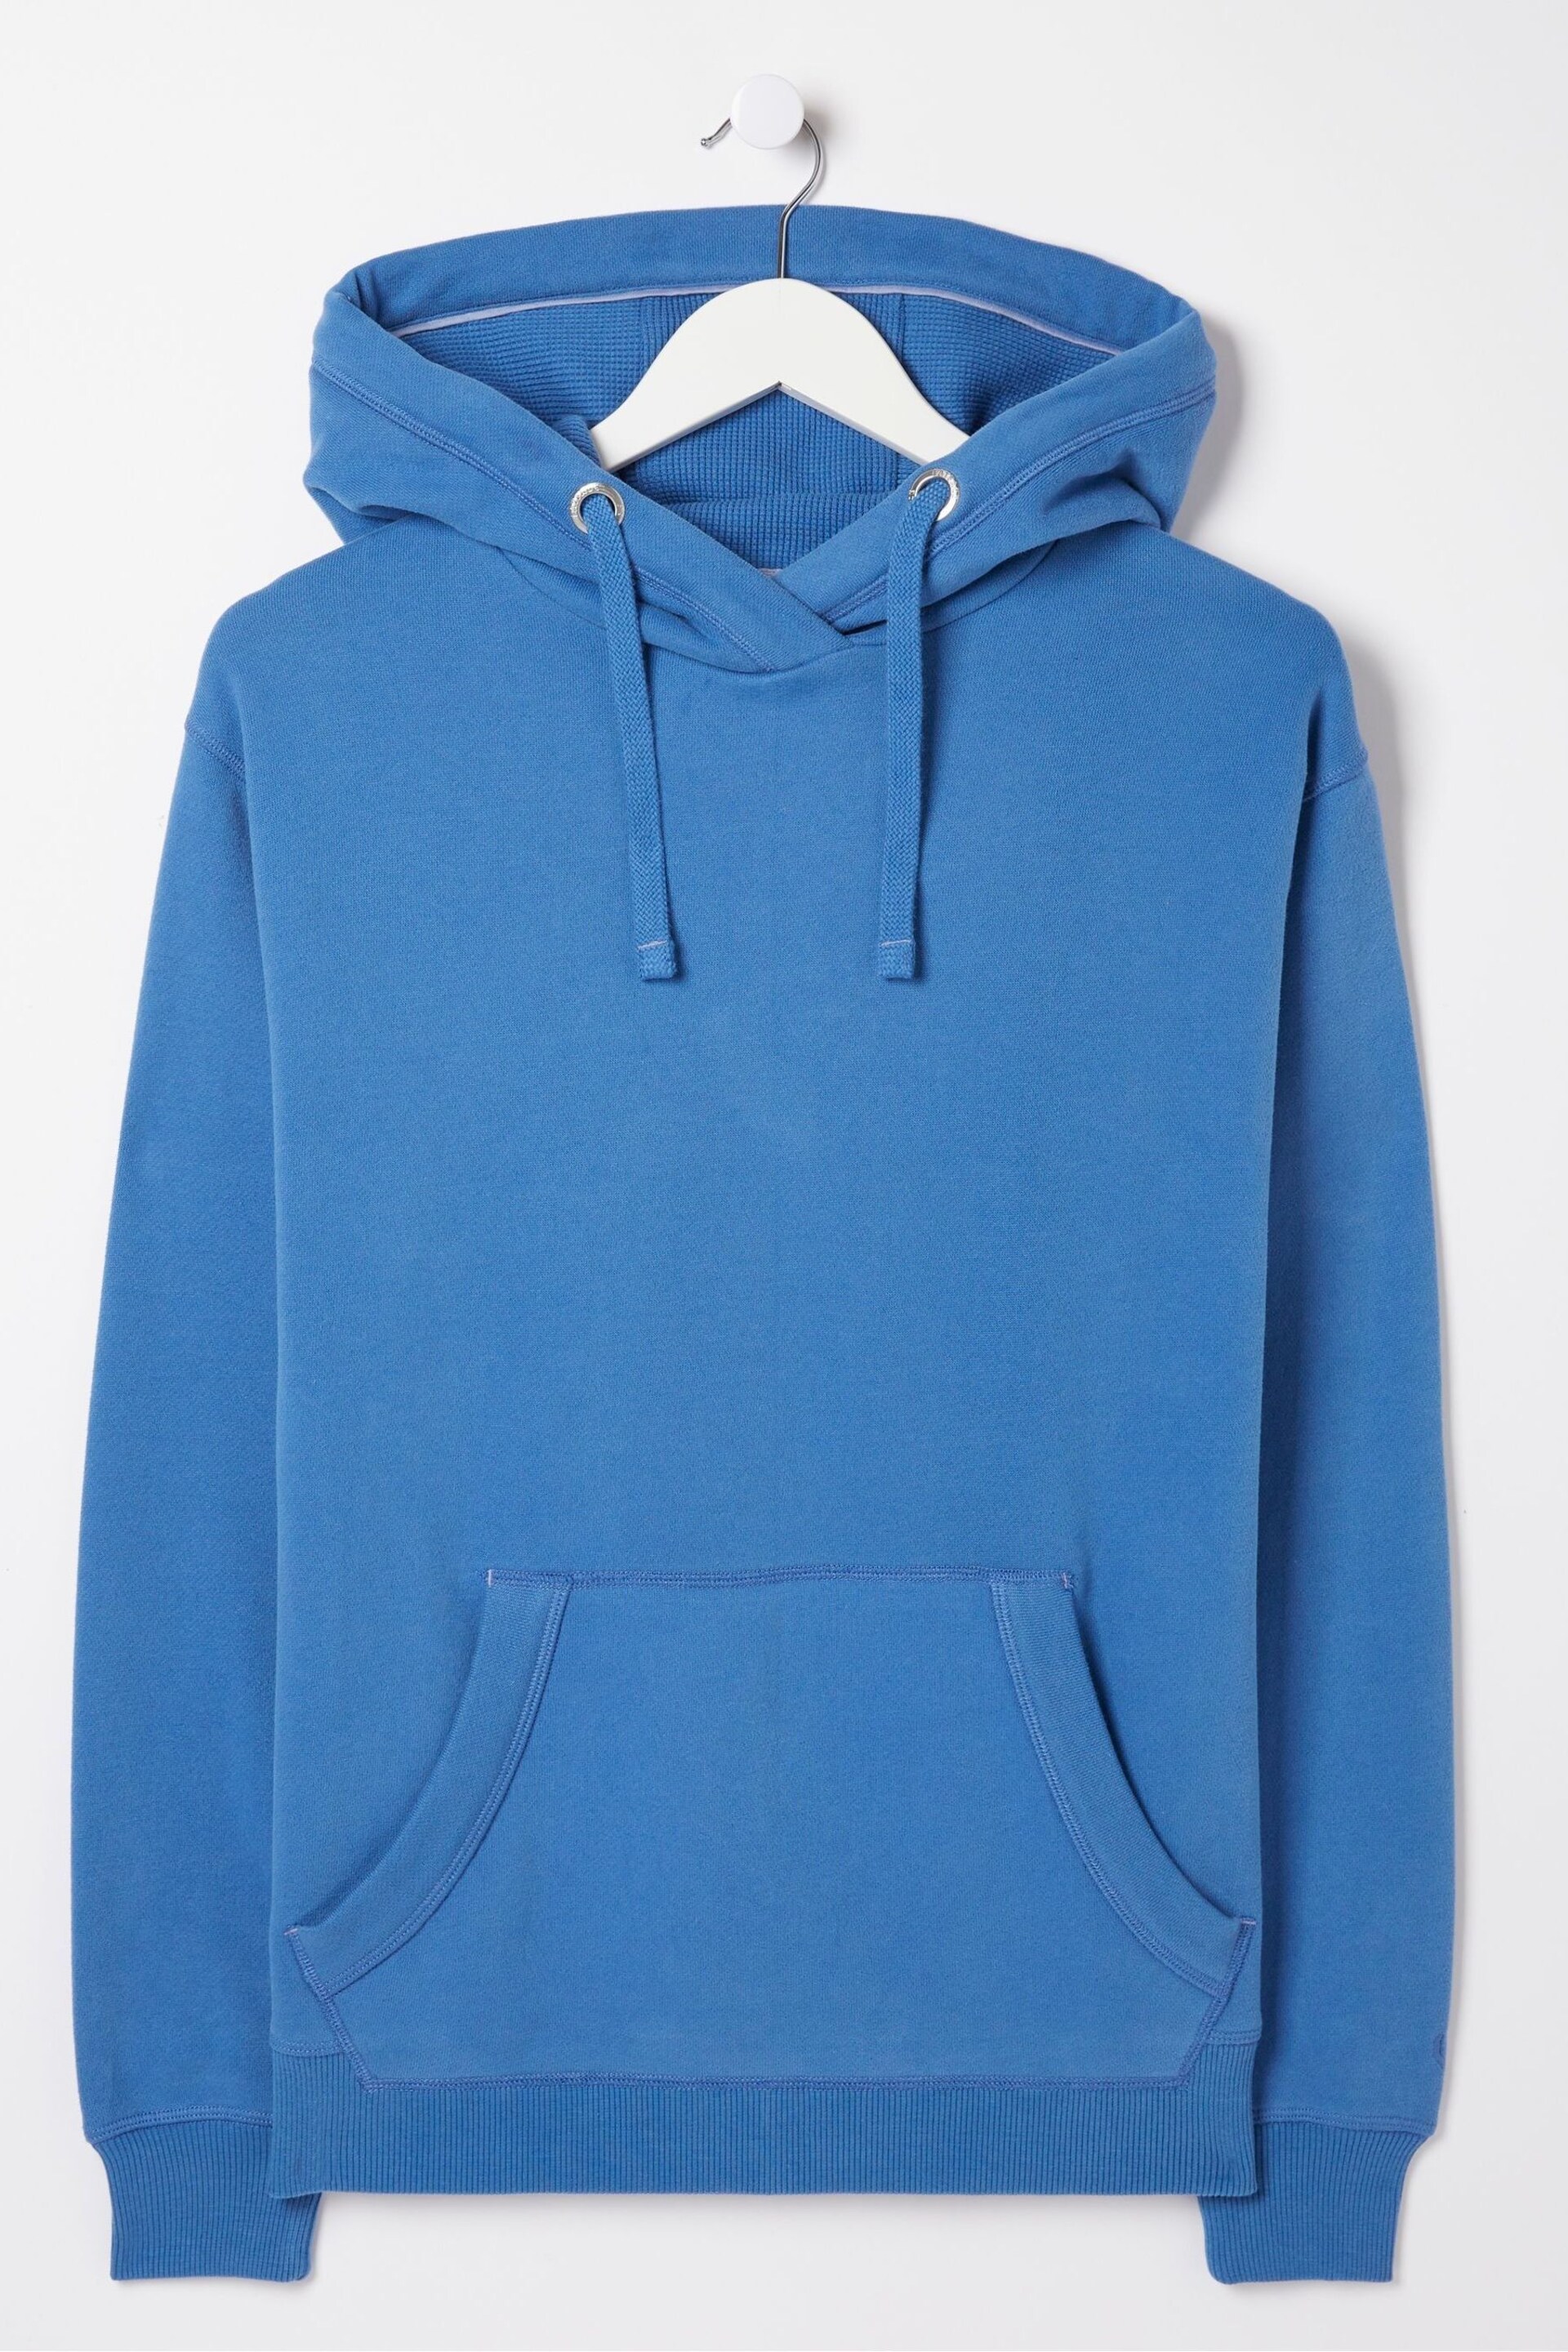 FatFace Blue Izzy Overhead Hoodie - Image 4 of 4